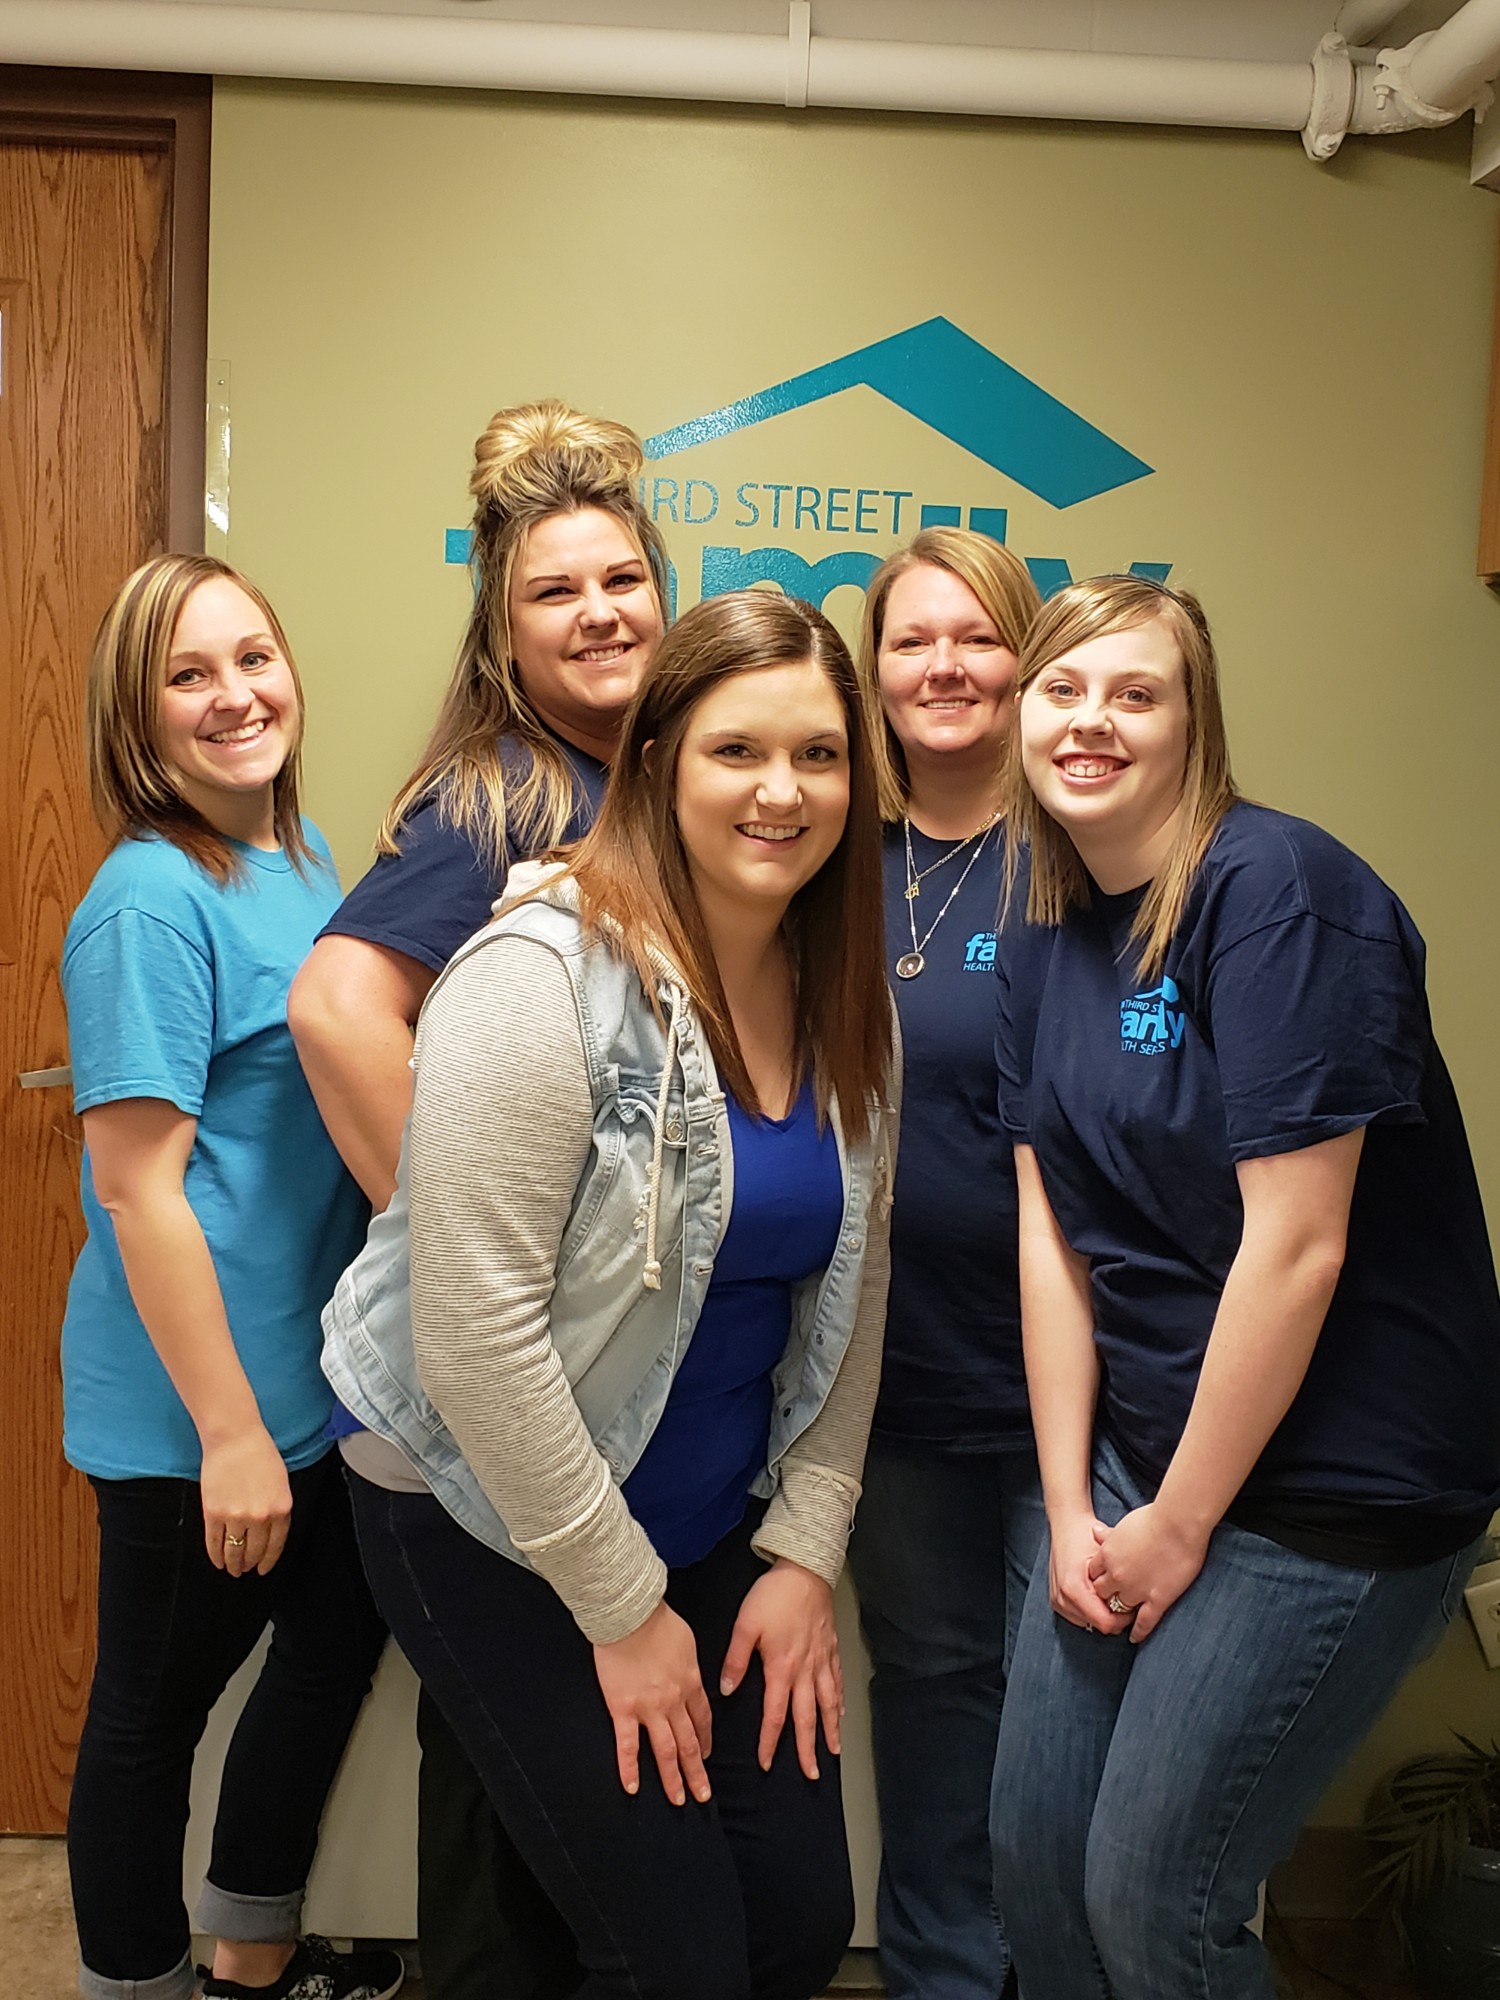 Third Street Family Health Services  Wear Blue to Work 2018